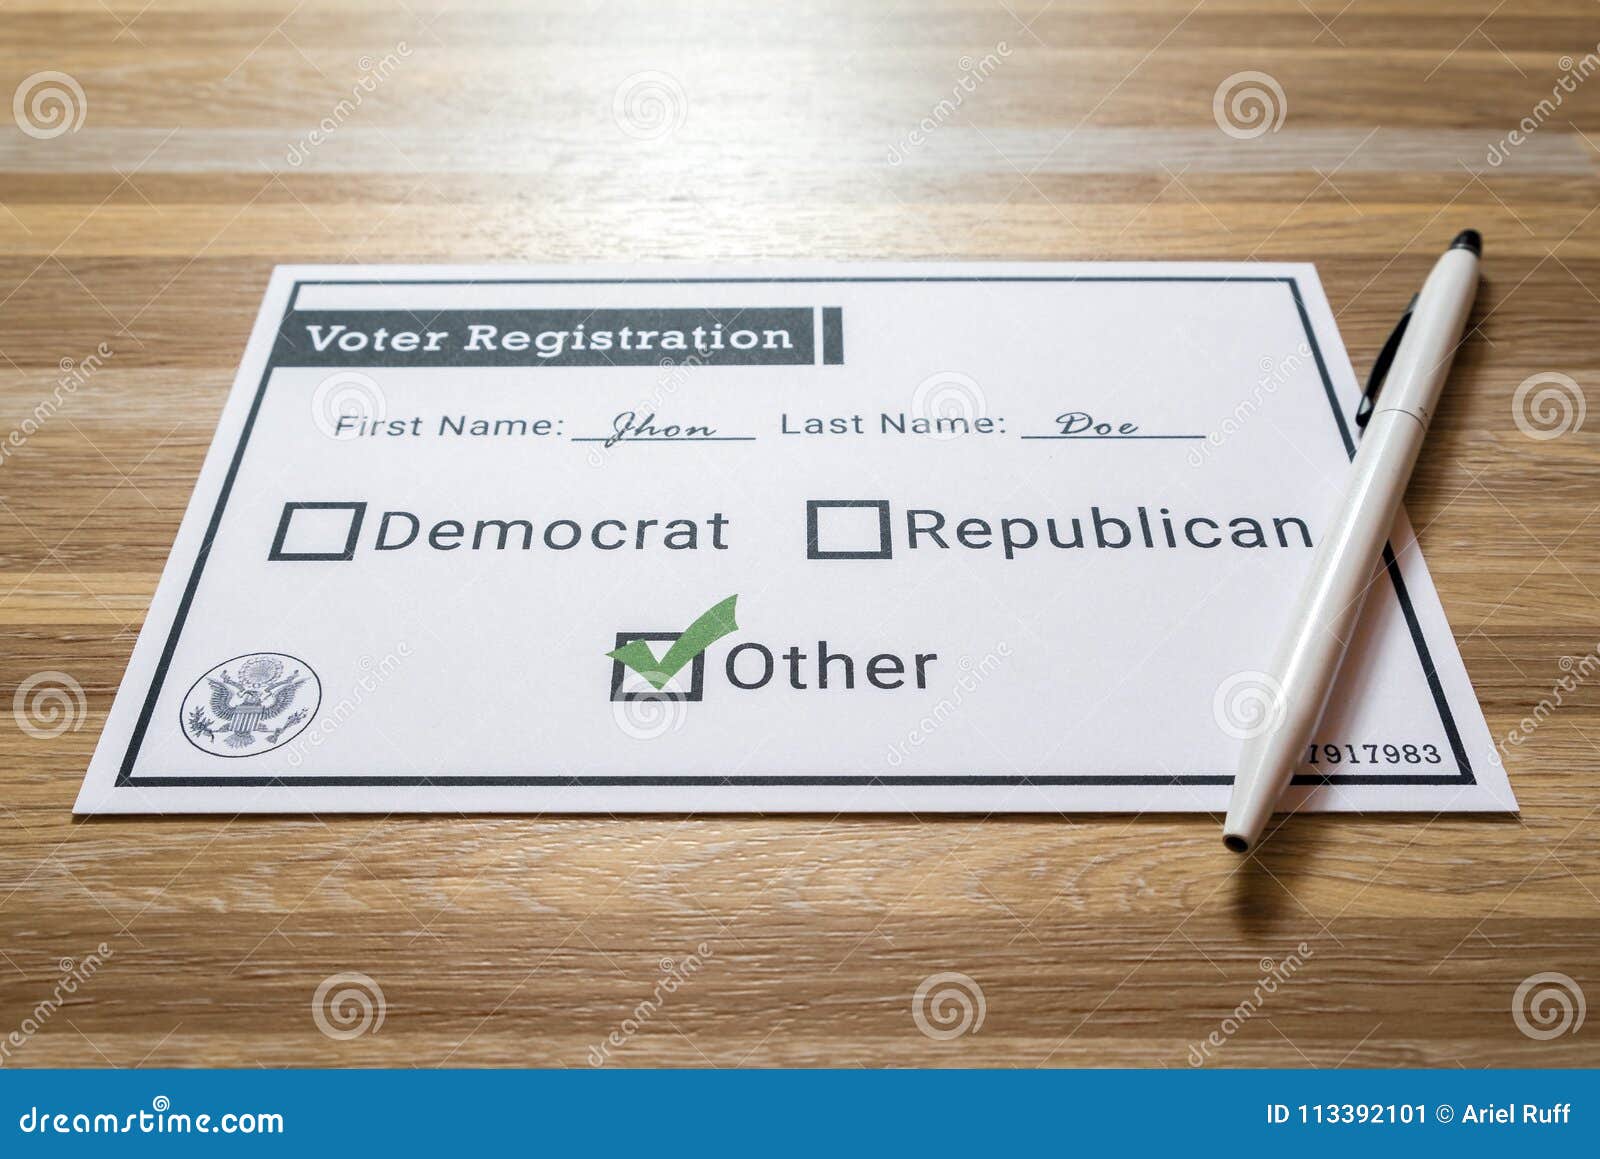 voter registration card with third party selected